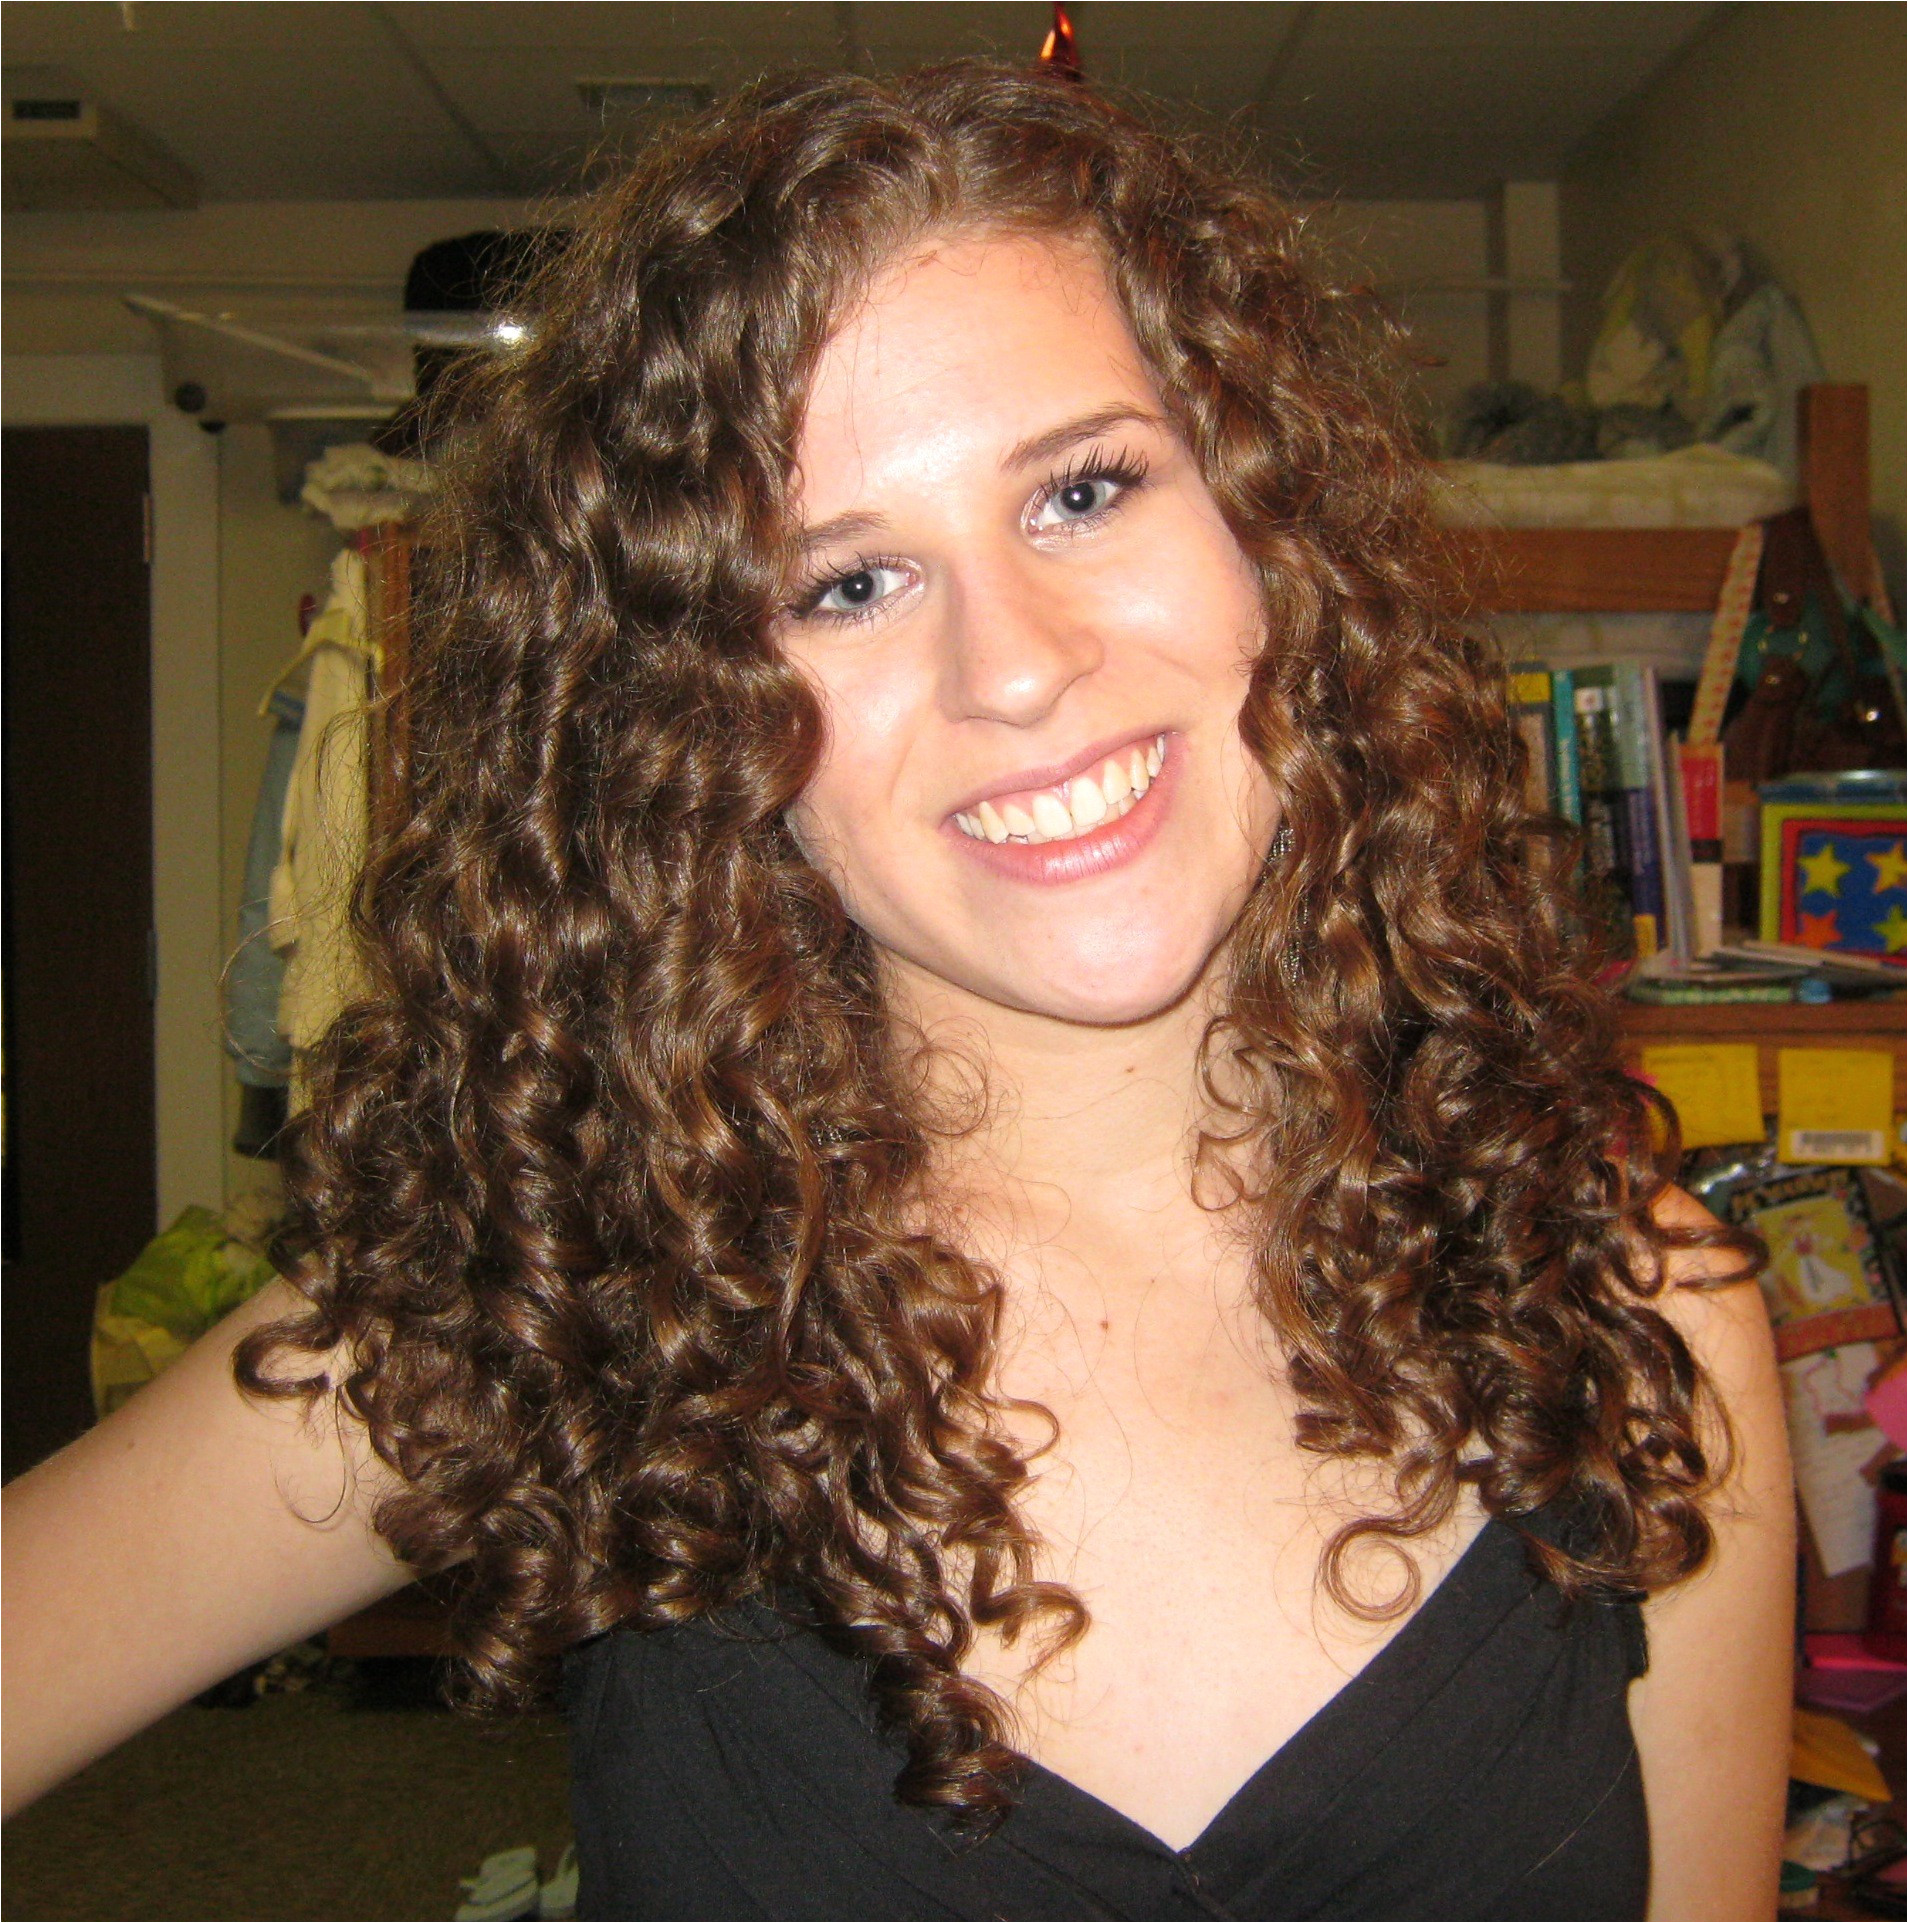 Girls Hairstyle for Wedding Lovely How to Do Hairstyles Fresh Very Curly Hairstyles Fresh Curly Hair